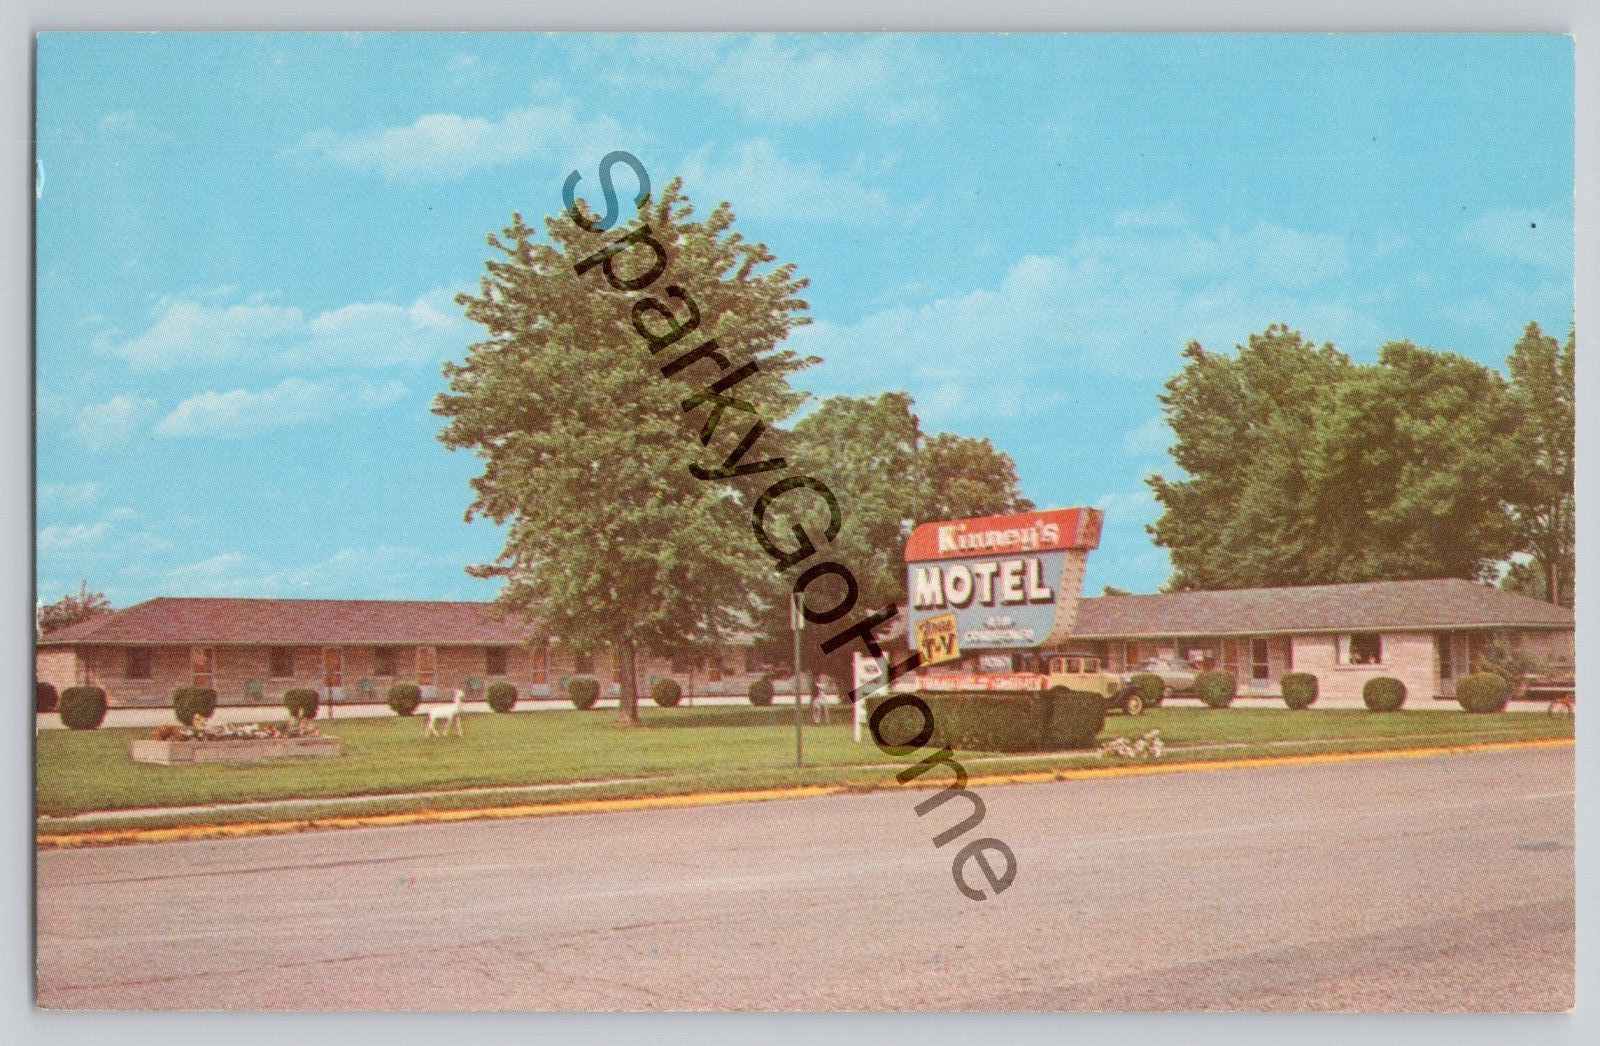 Kinney\'s Motel West Dublin Indiana Wall-to-wall Playground Deer Statues Free TV